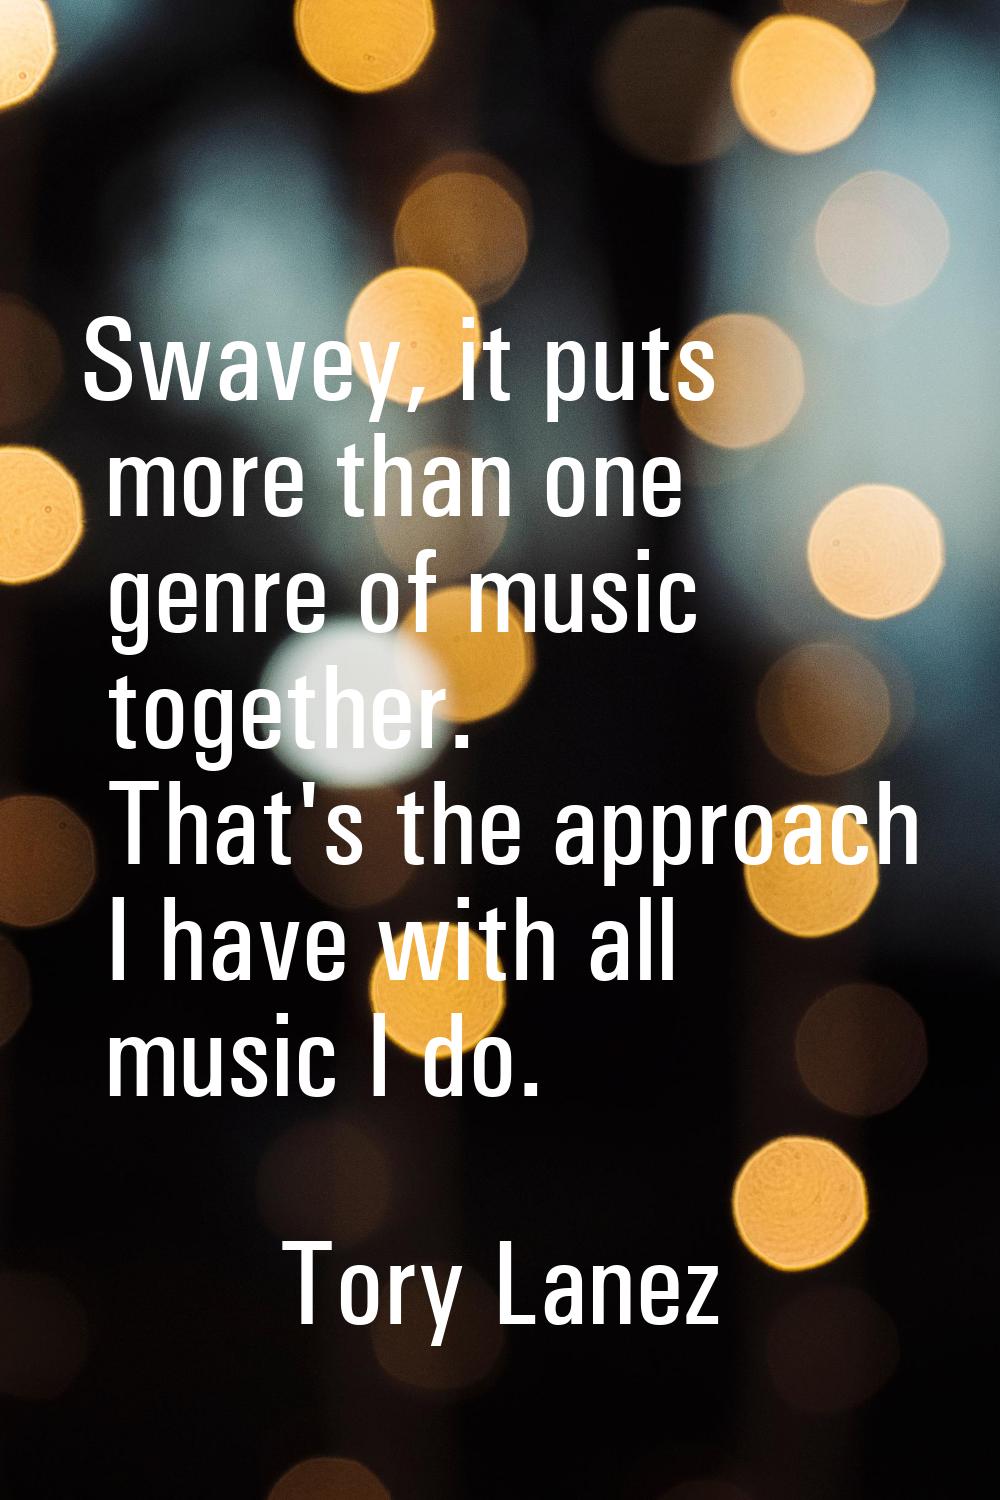 Swavey, it puts more than one genre of music together. That's the approach I have with all music I 